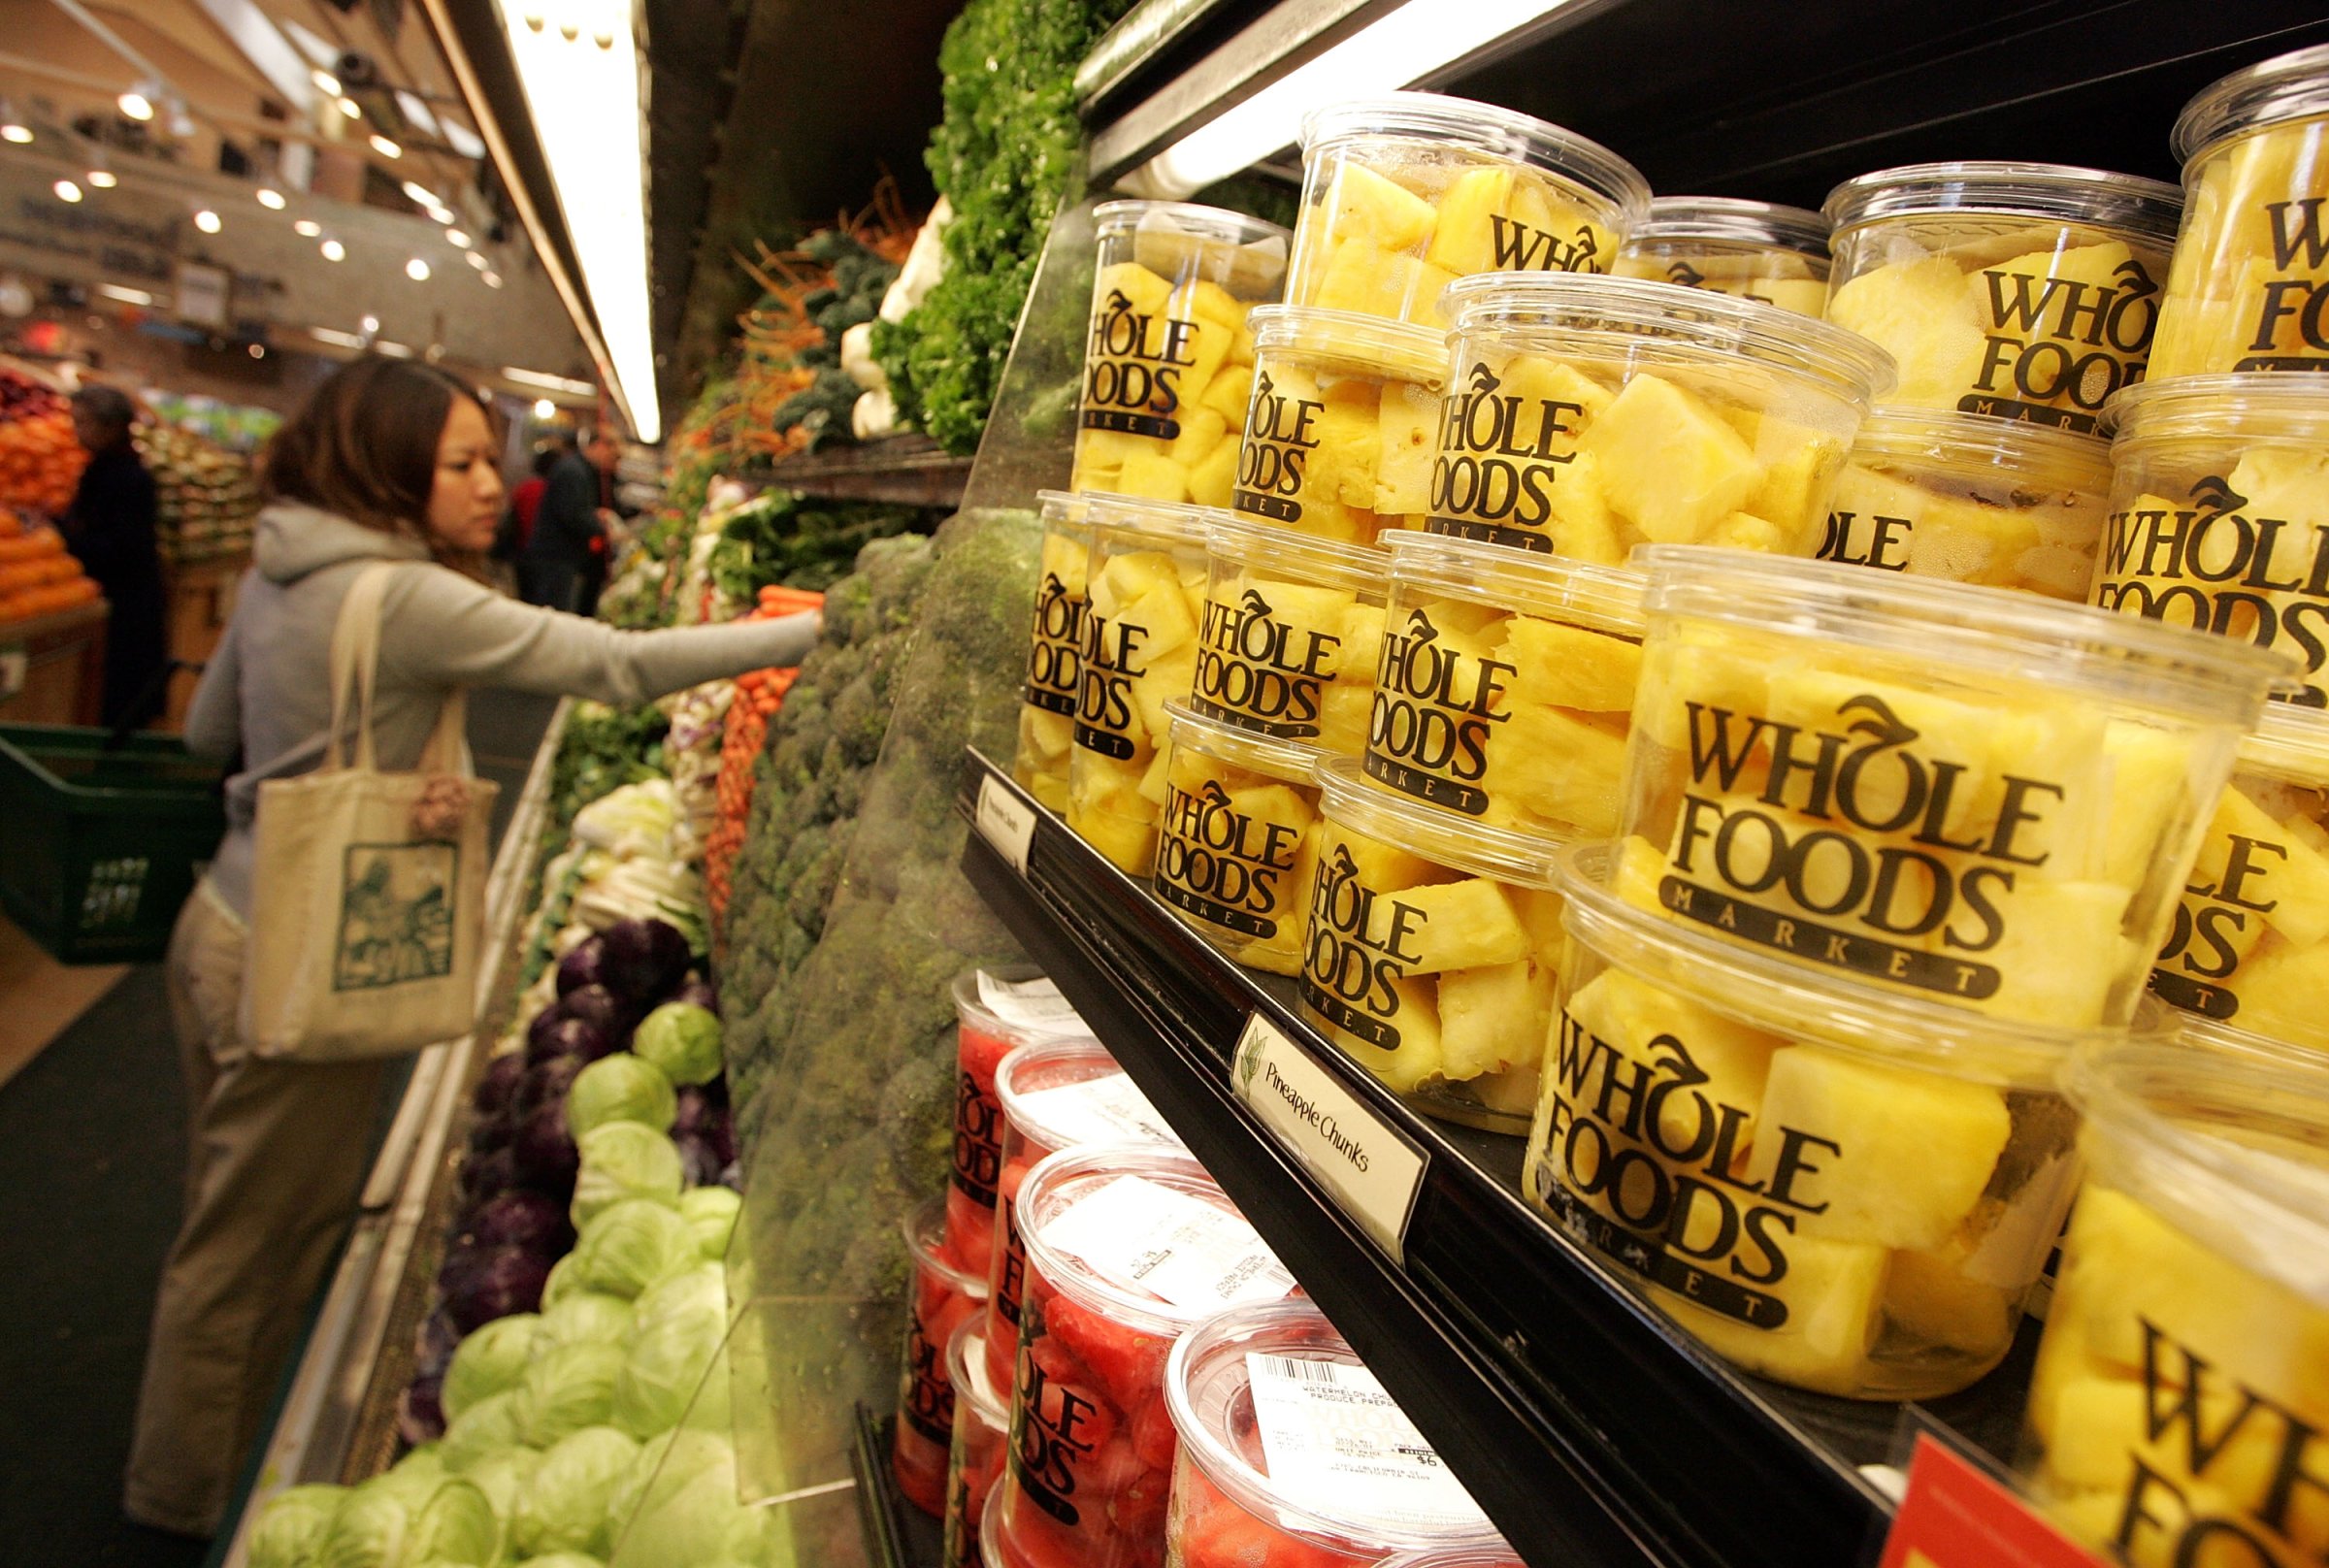 A customer shops for produce at a Whole Foods Market February 22, 2007 in San Francisco, California.